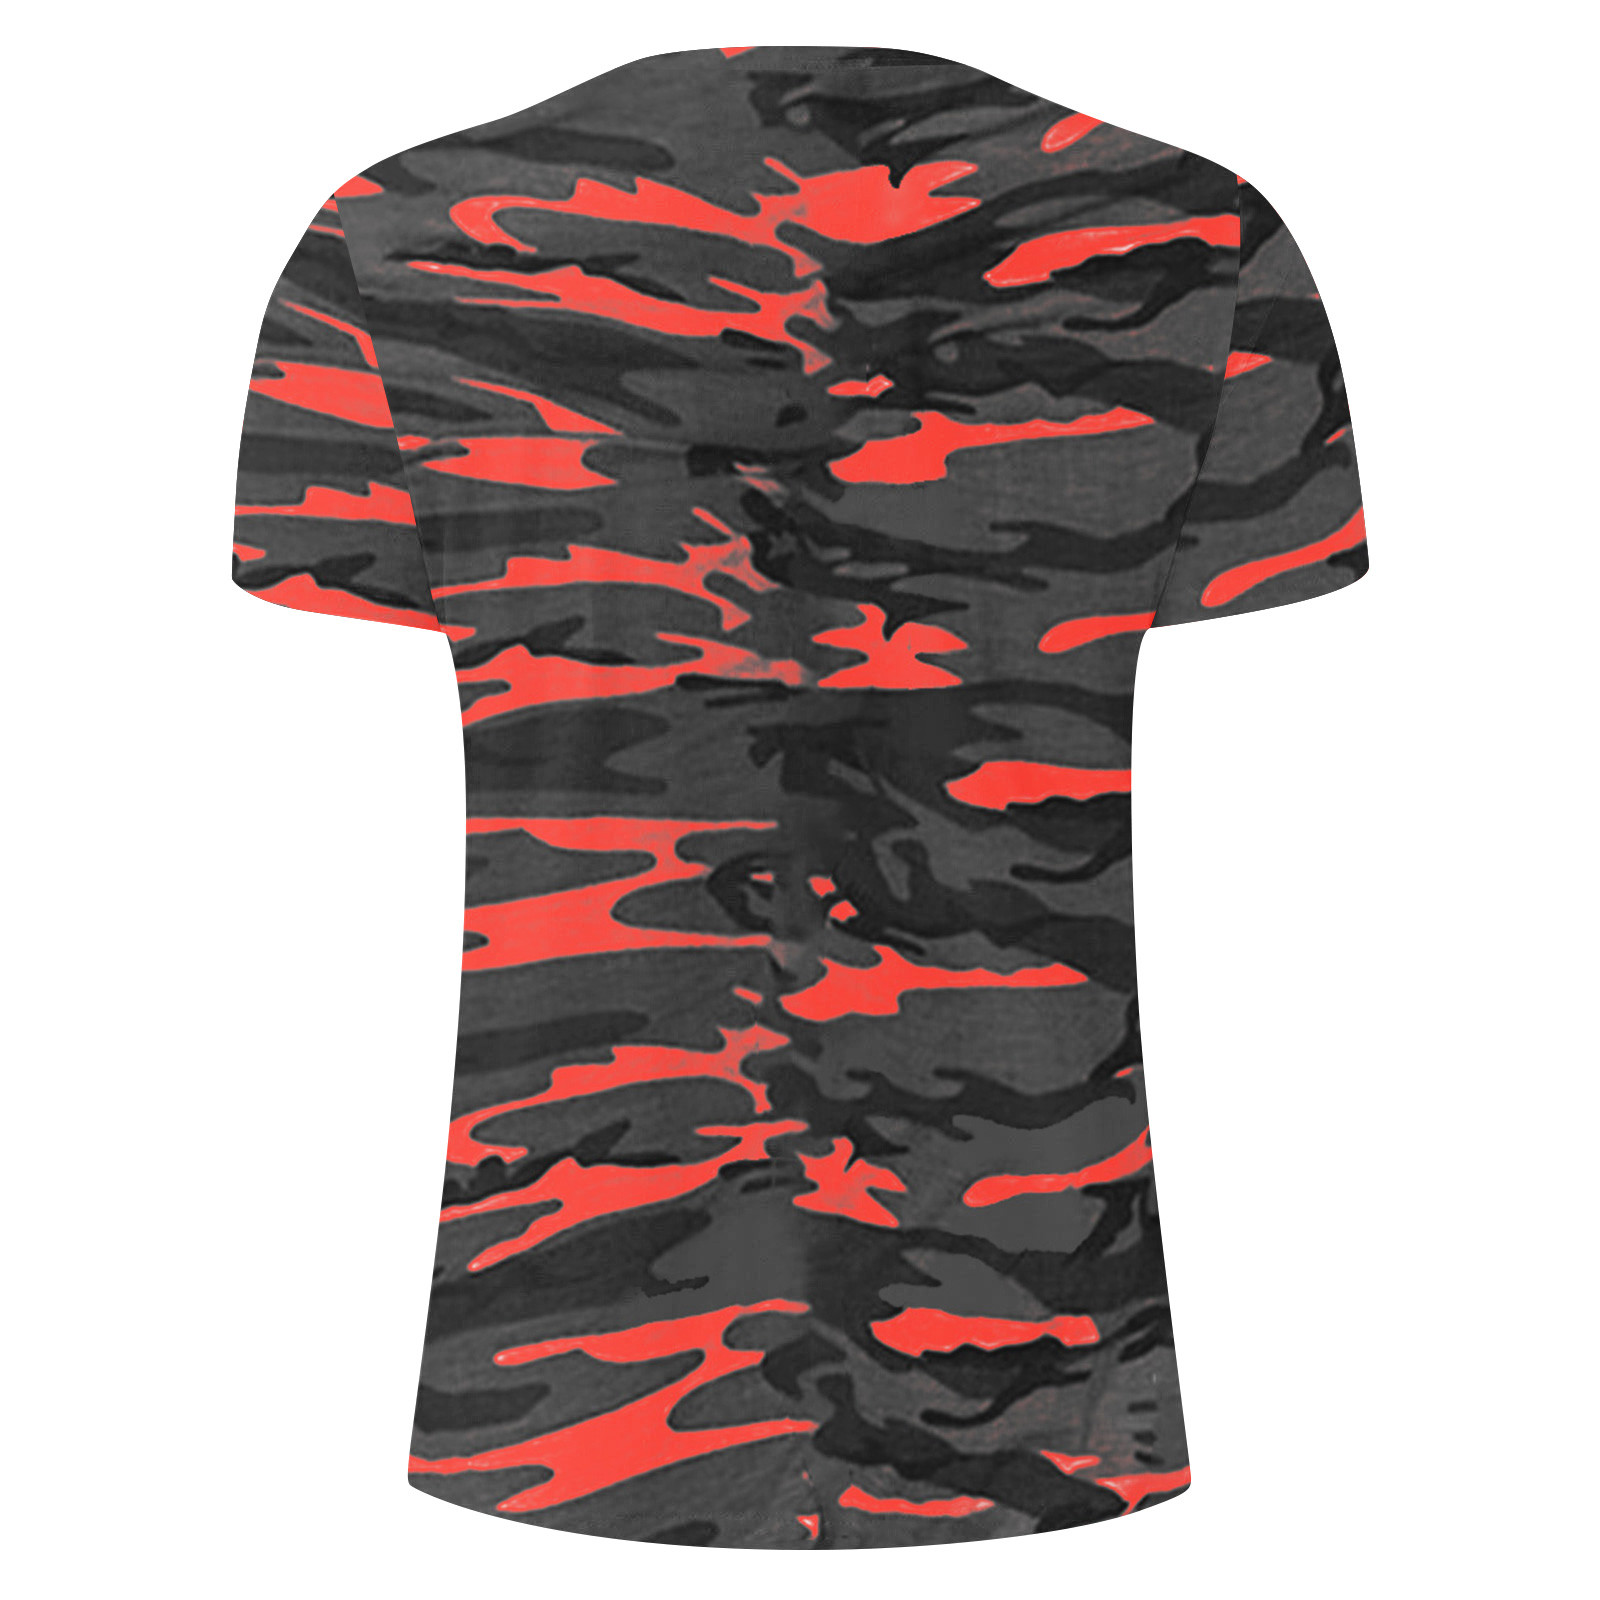 DLfVUB Mens Camouflage T-Shirts Casual Summer Short Sleeve Round Neck ...